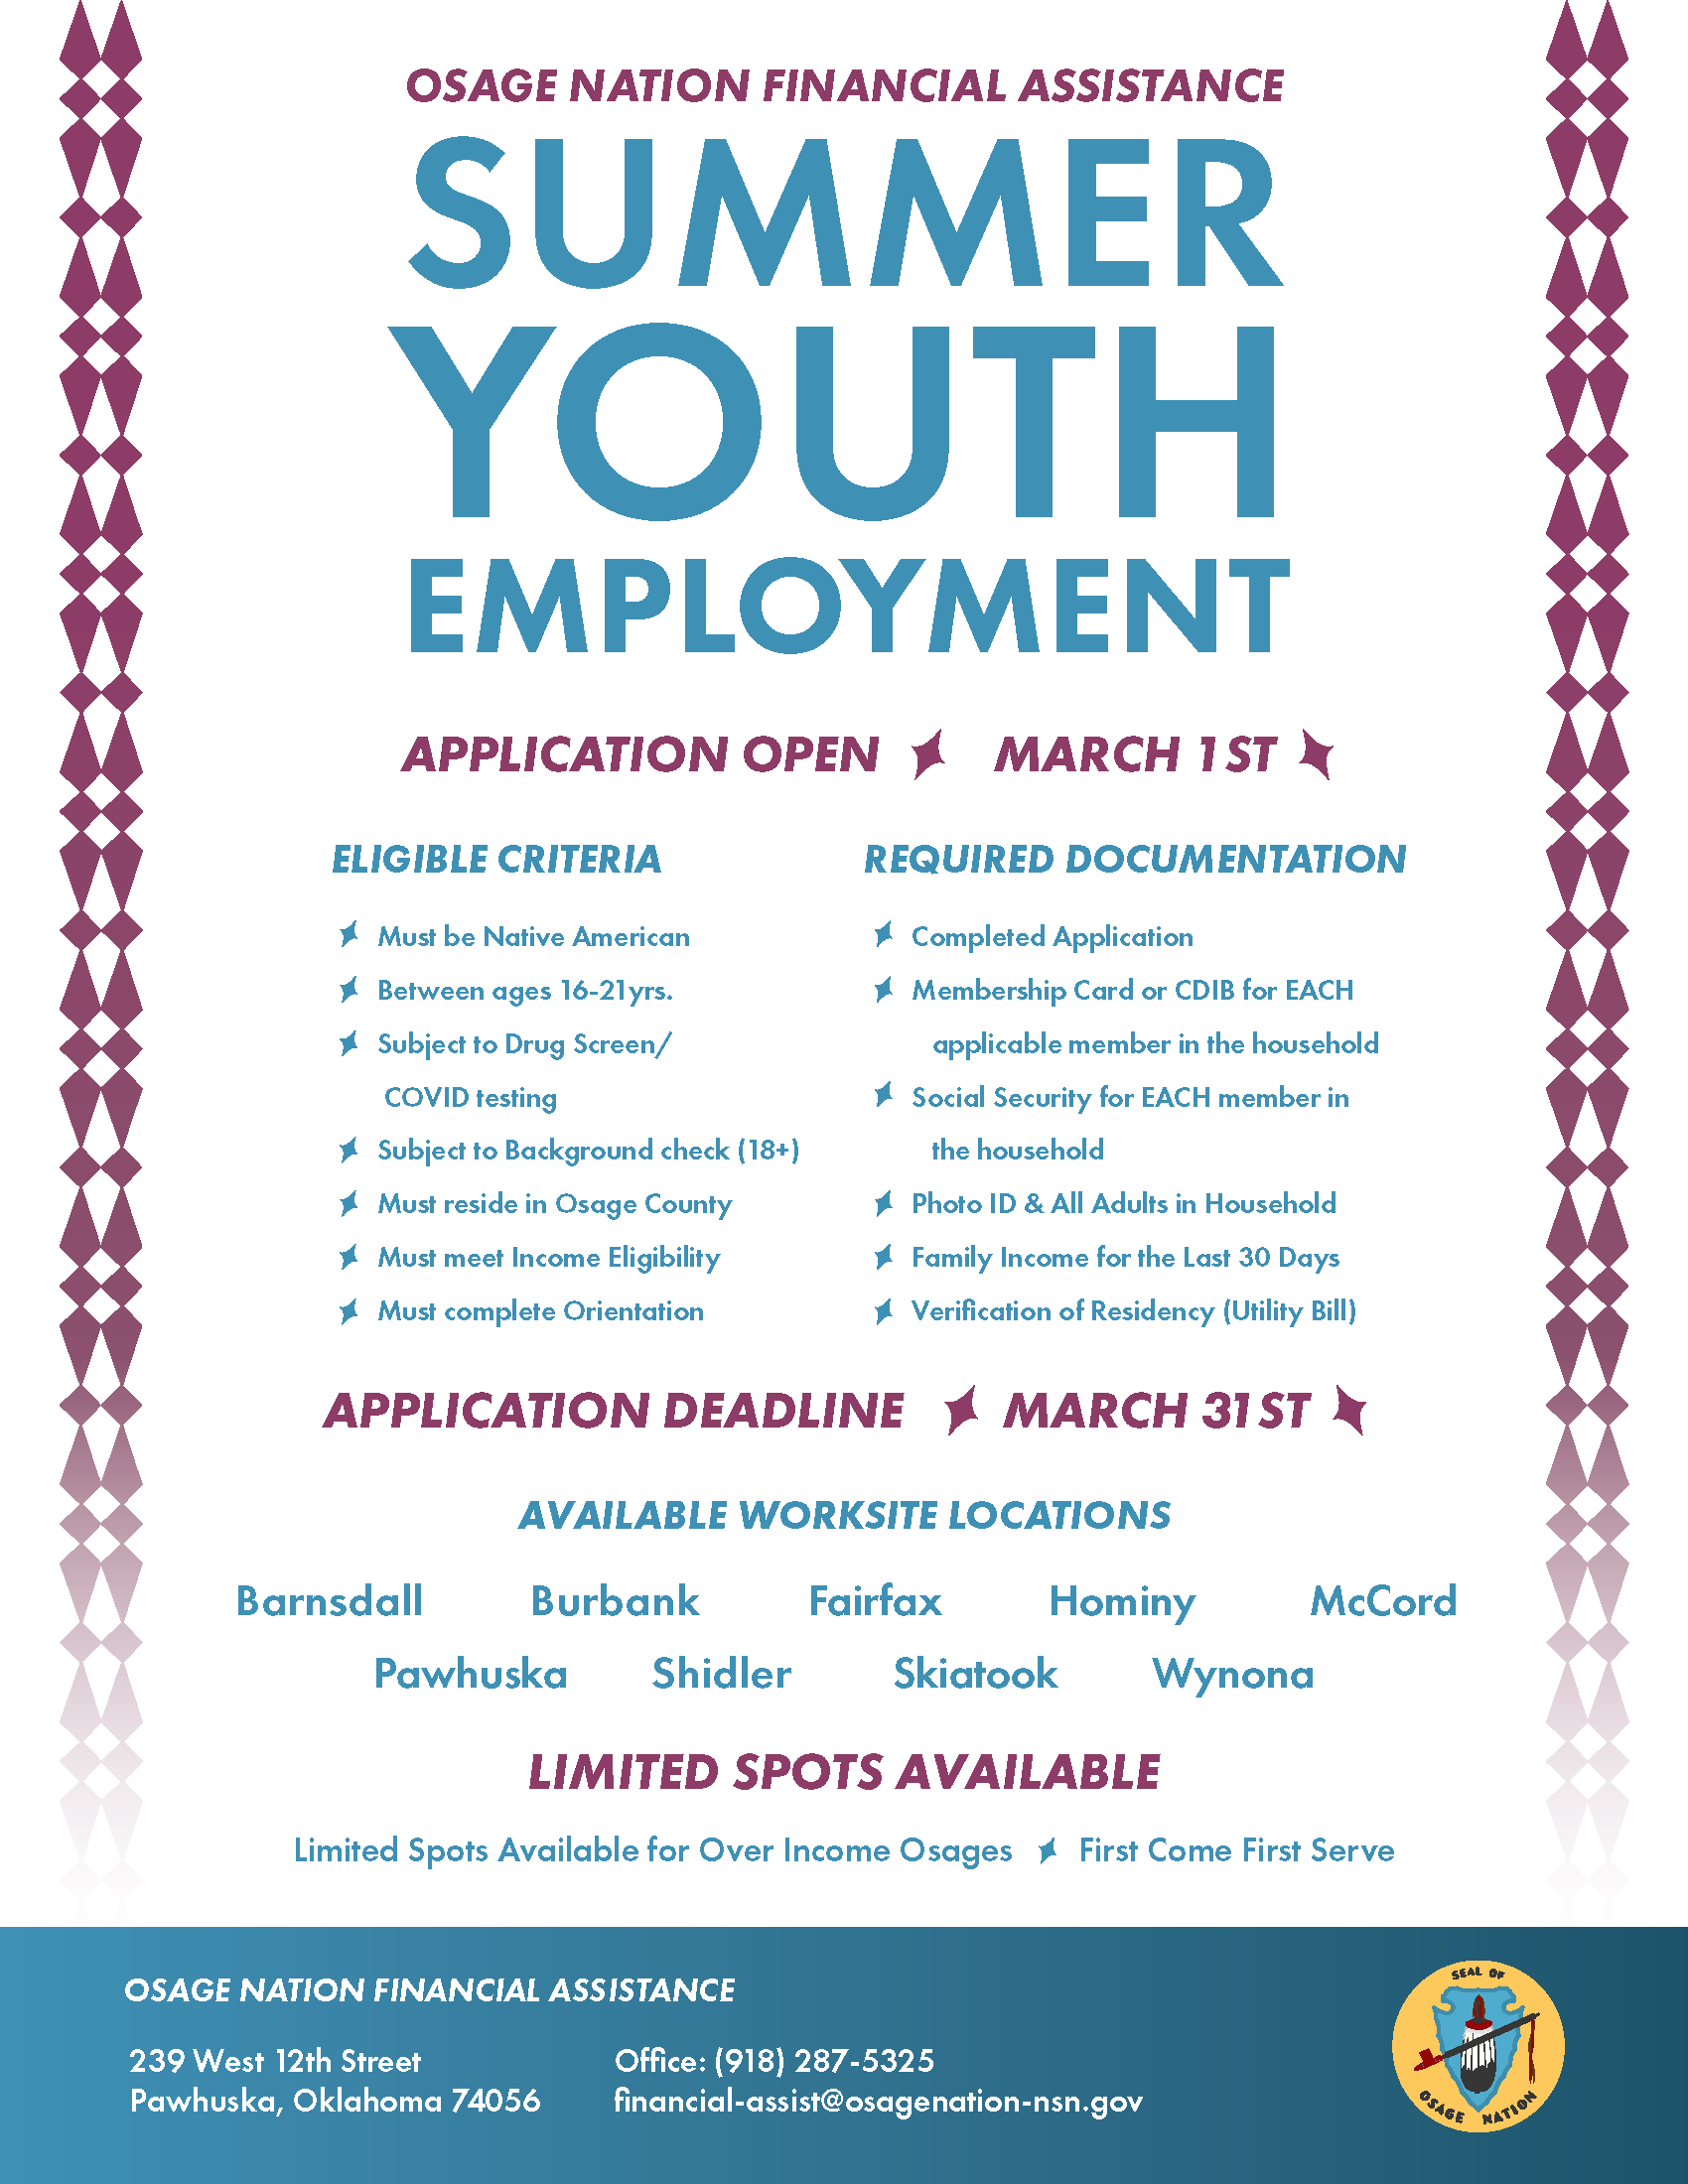 Osage Nation Financial Assistance Summer Youth Application to Open